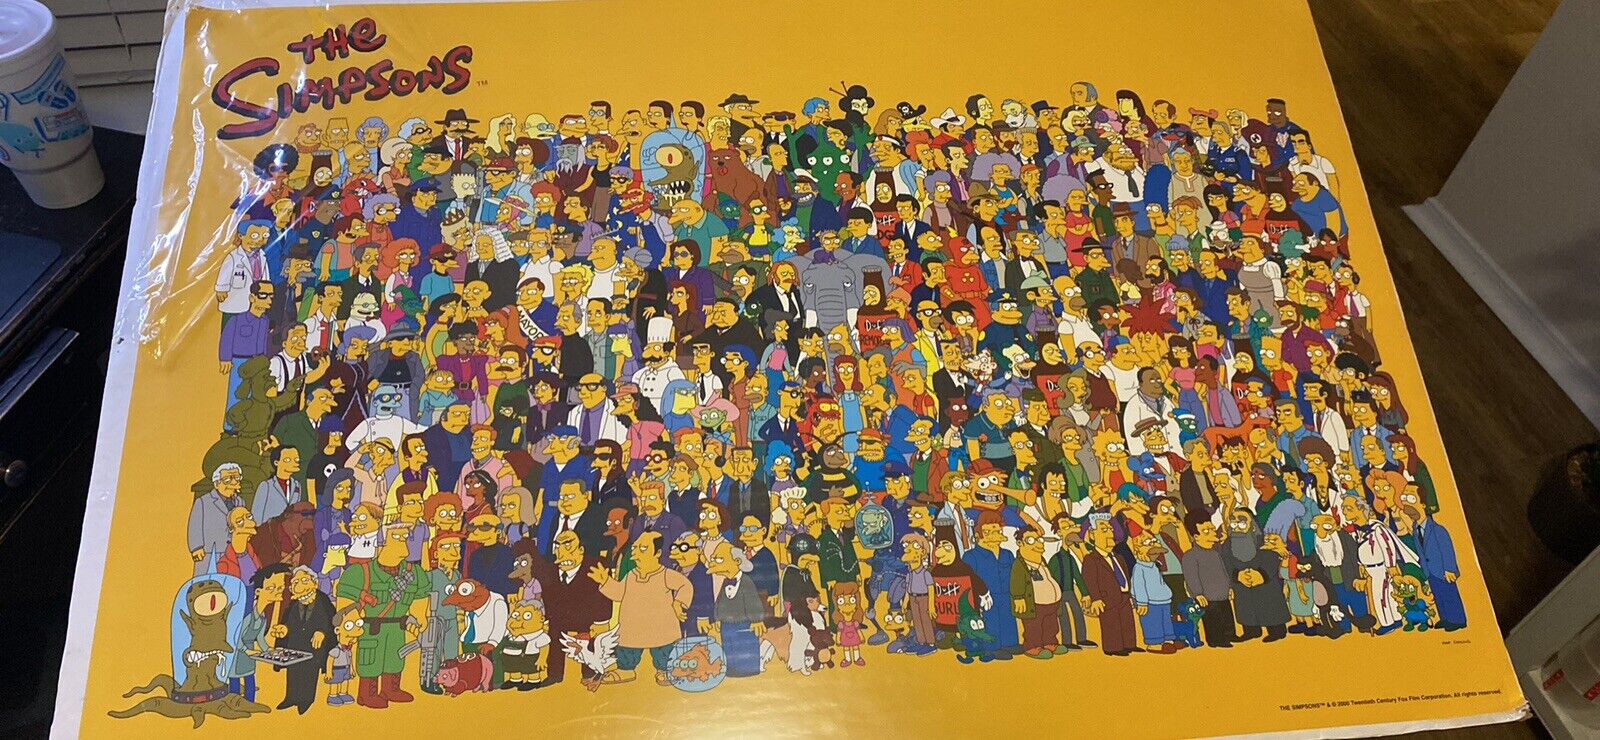 The Simpsons Vintage 2000 Large POSTER - Every Character Matt Groening 24x36